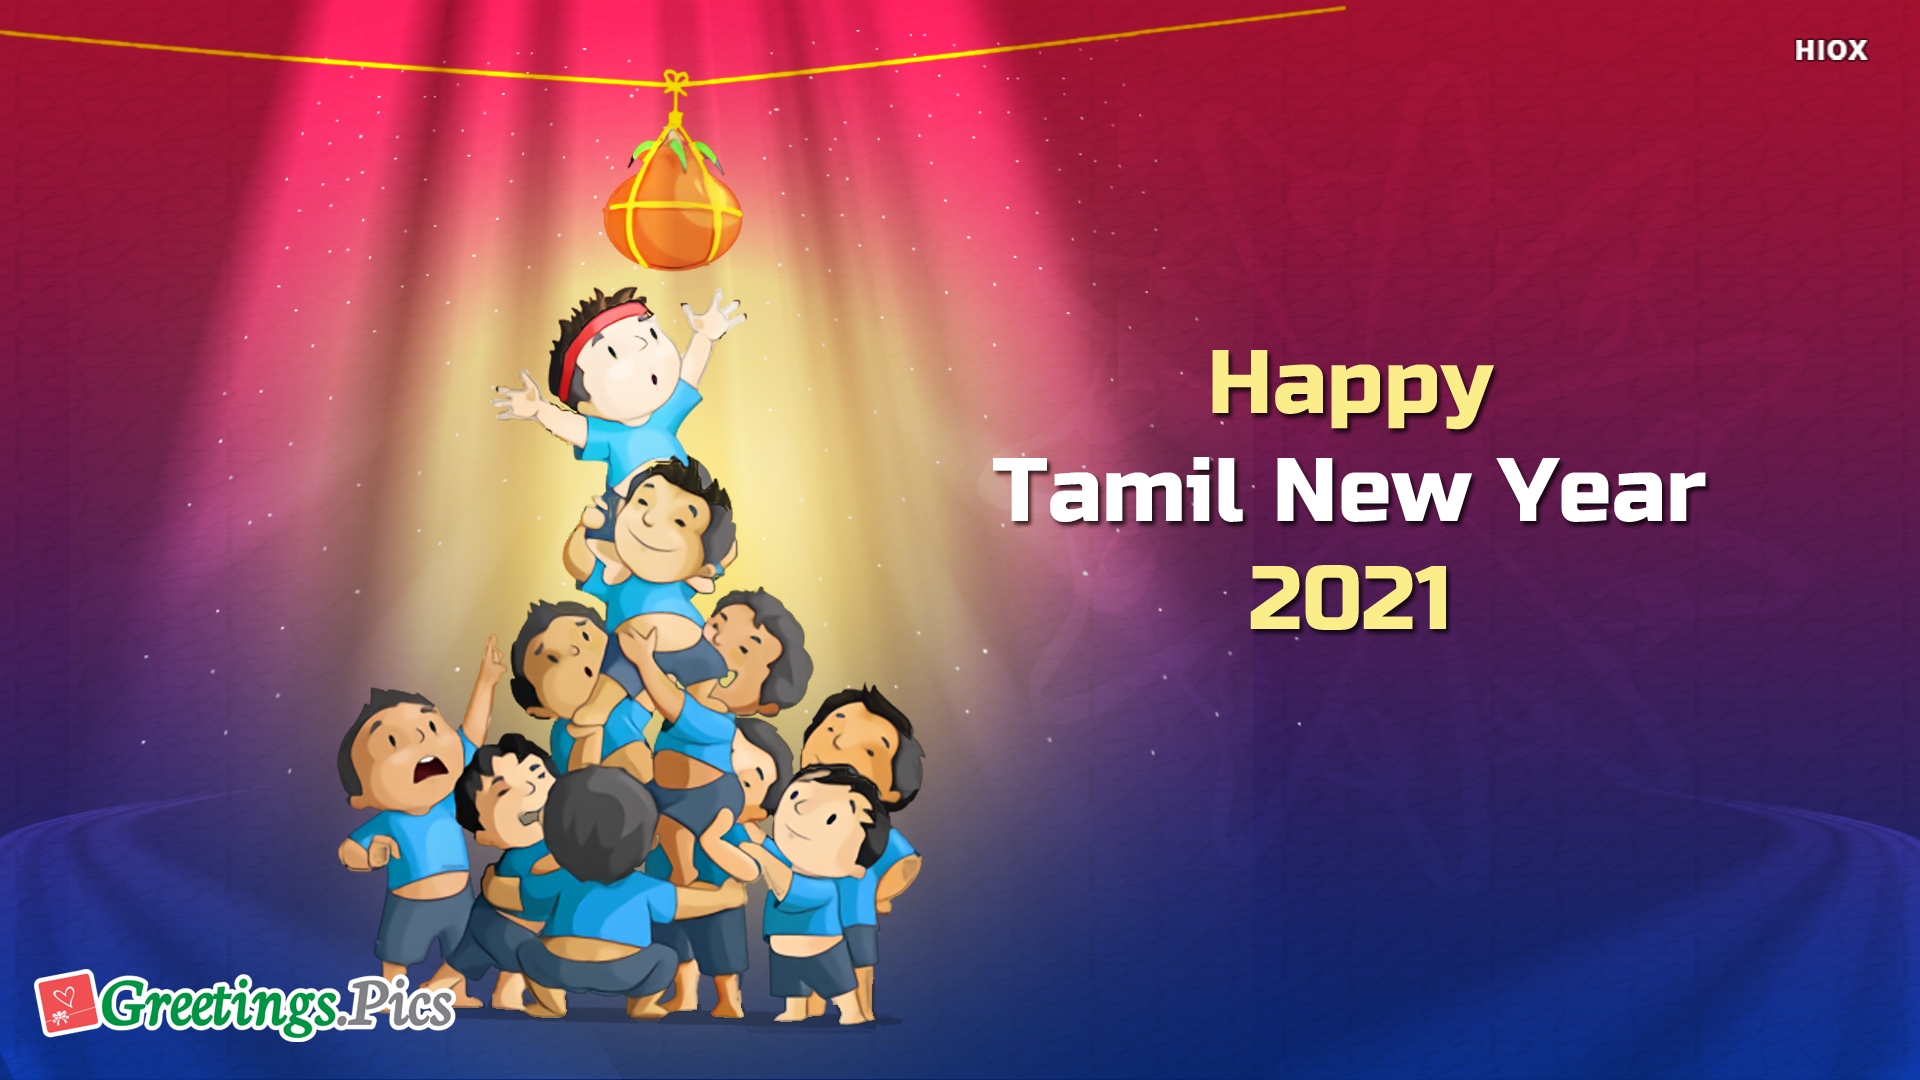 Tamil New Year Image Wallpapers